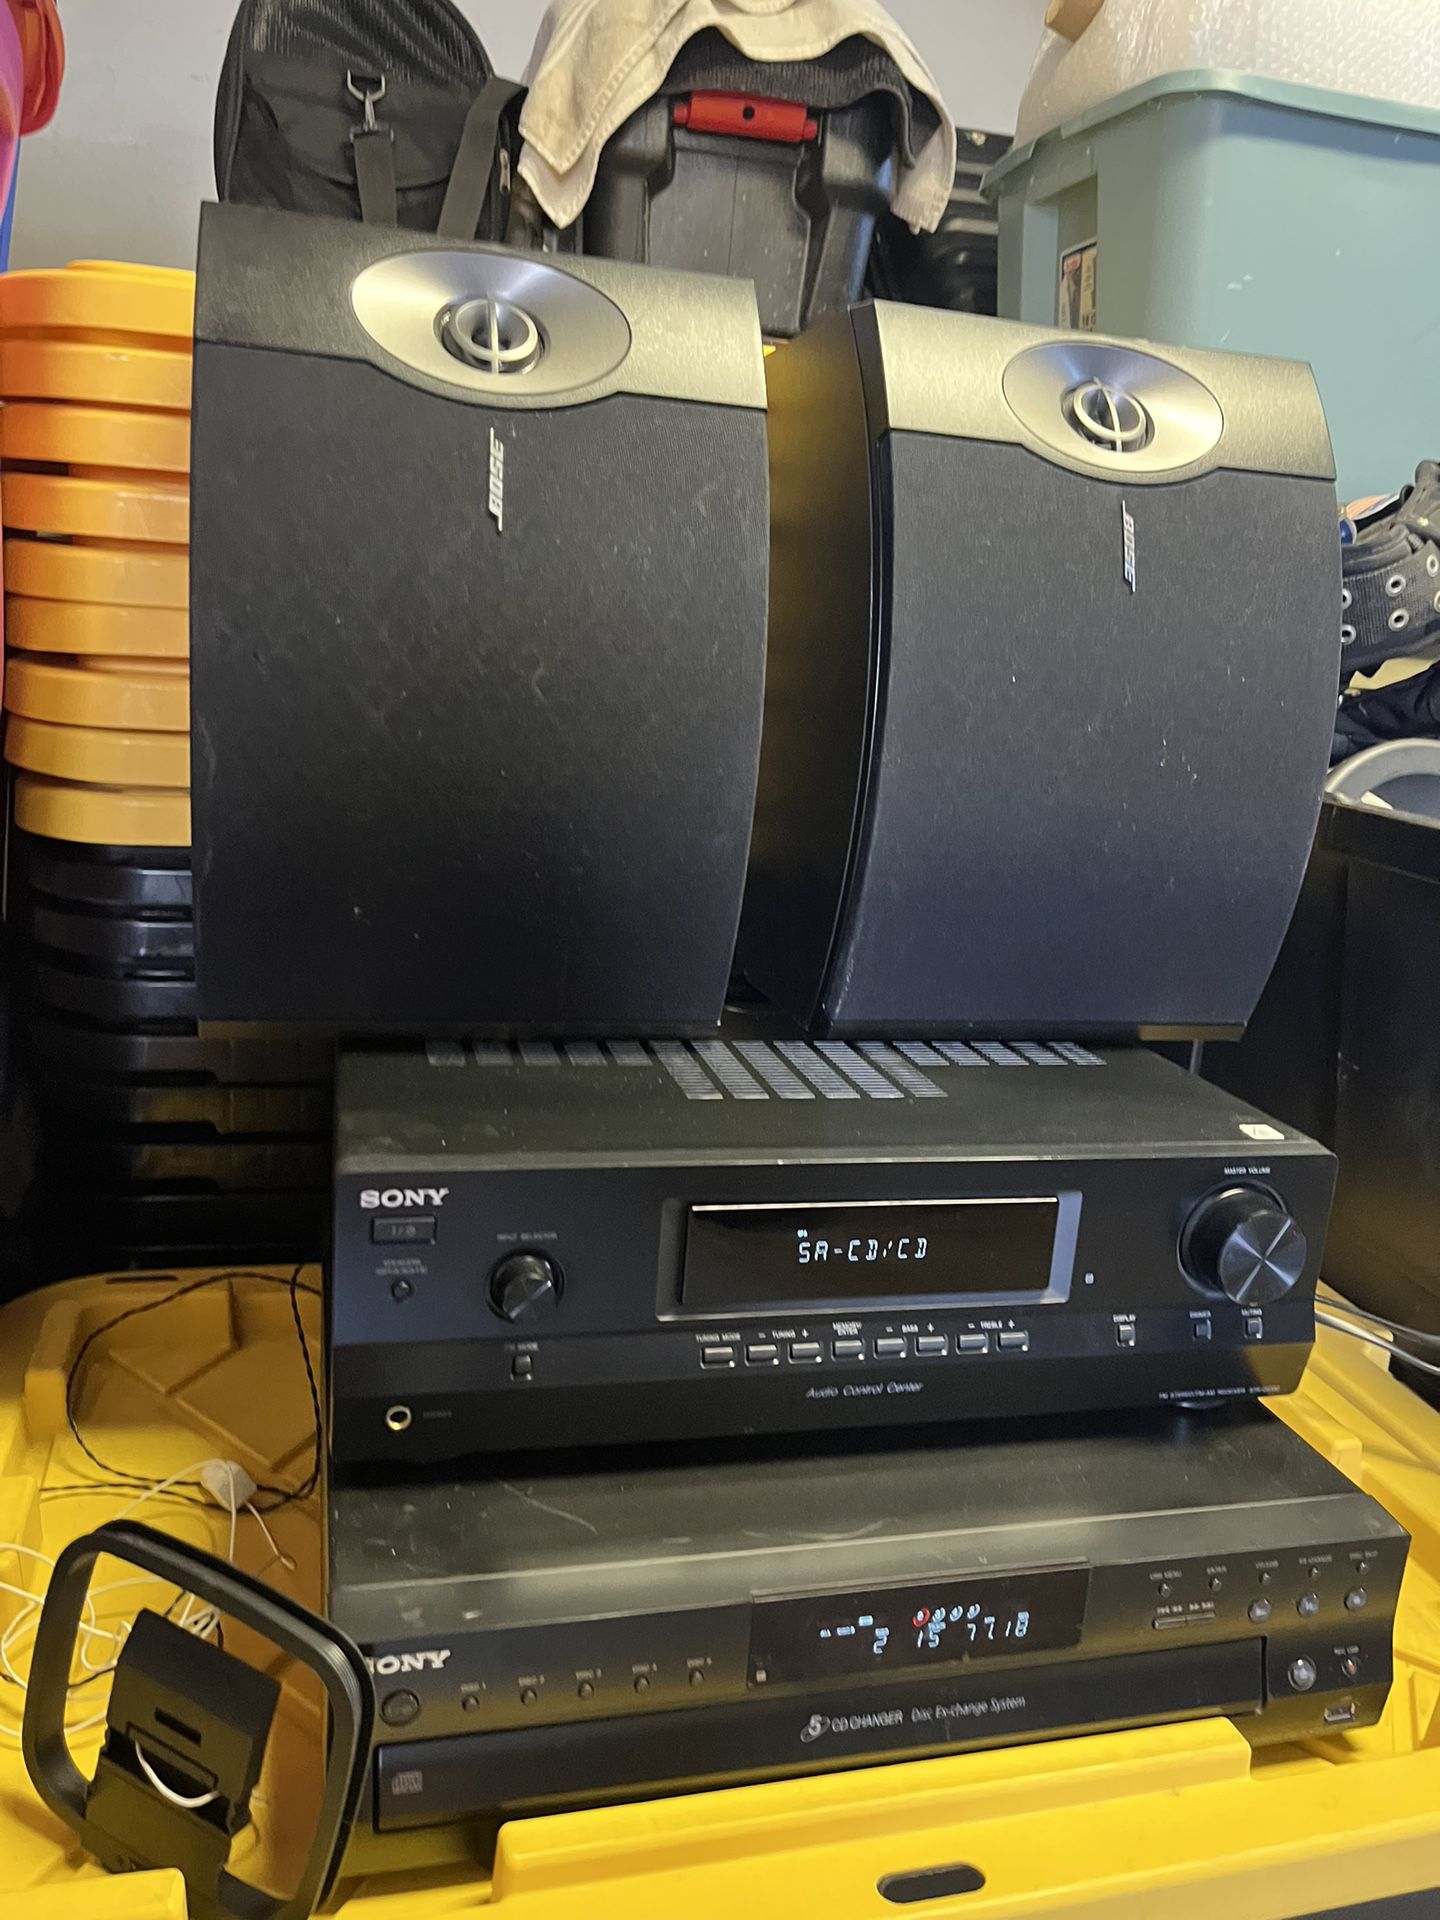 Sony STR DH130 stereo Receiver & 5-Disc changer CDP-CE500 W/ BOSE 301 series speakers 